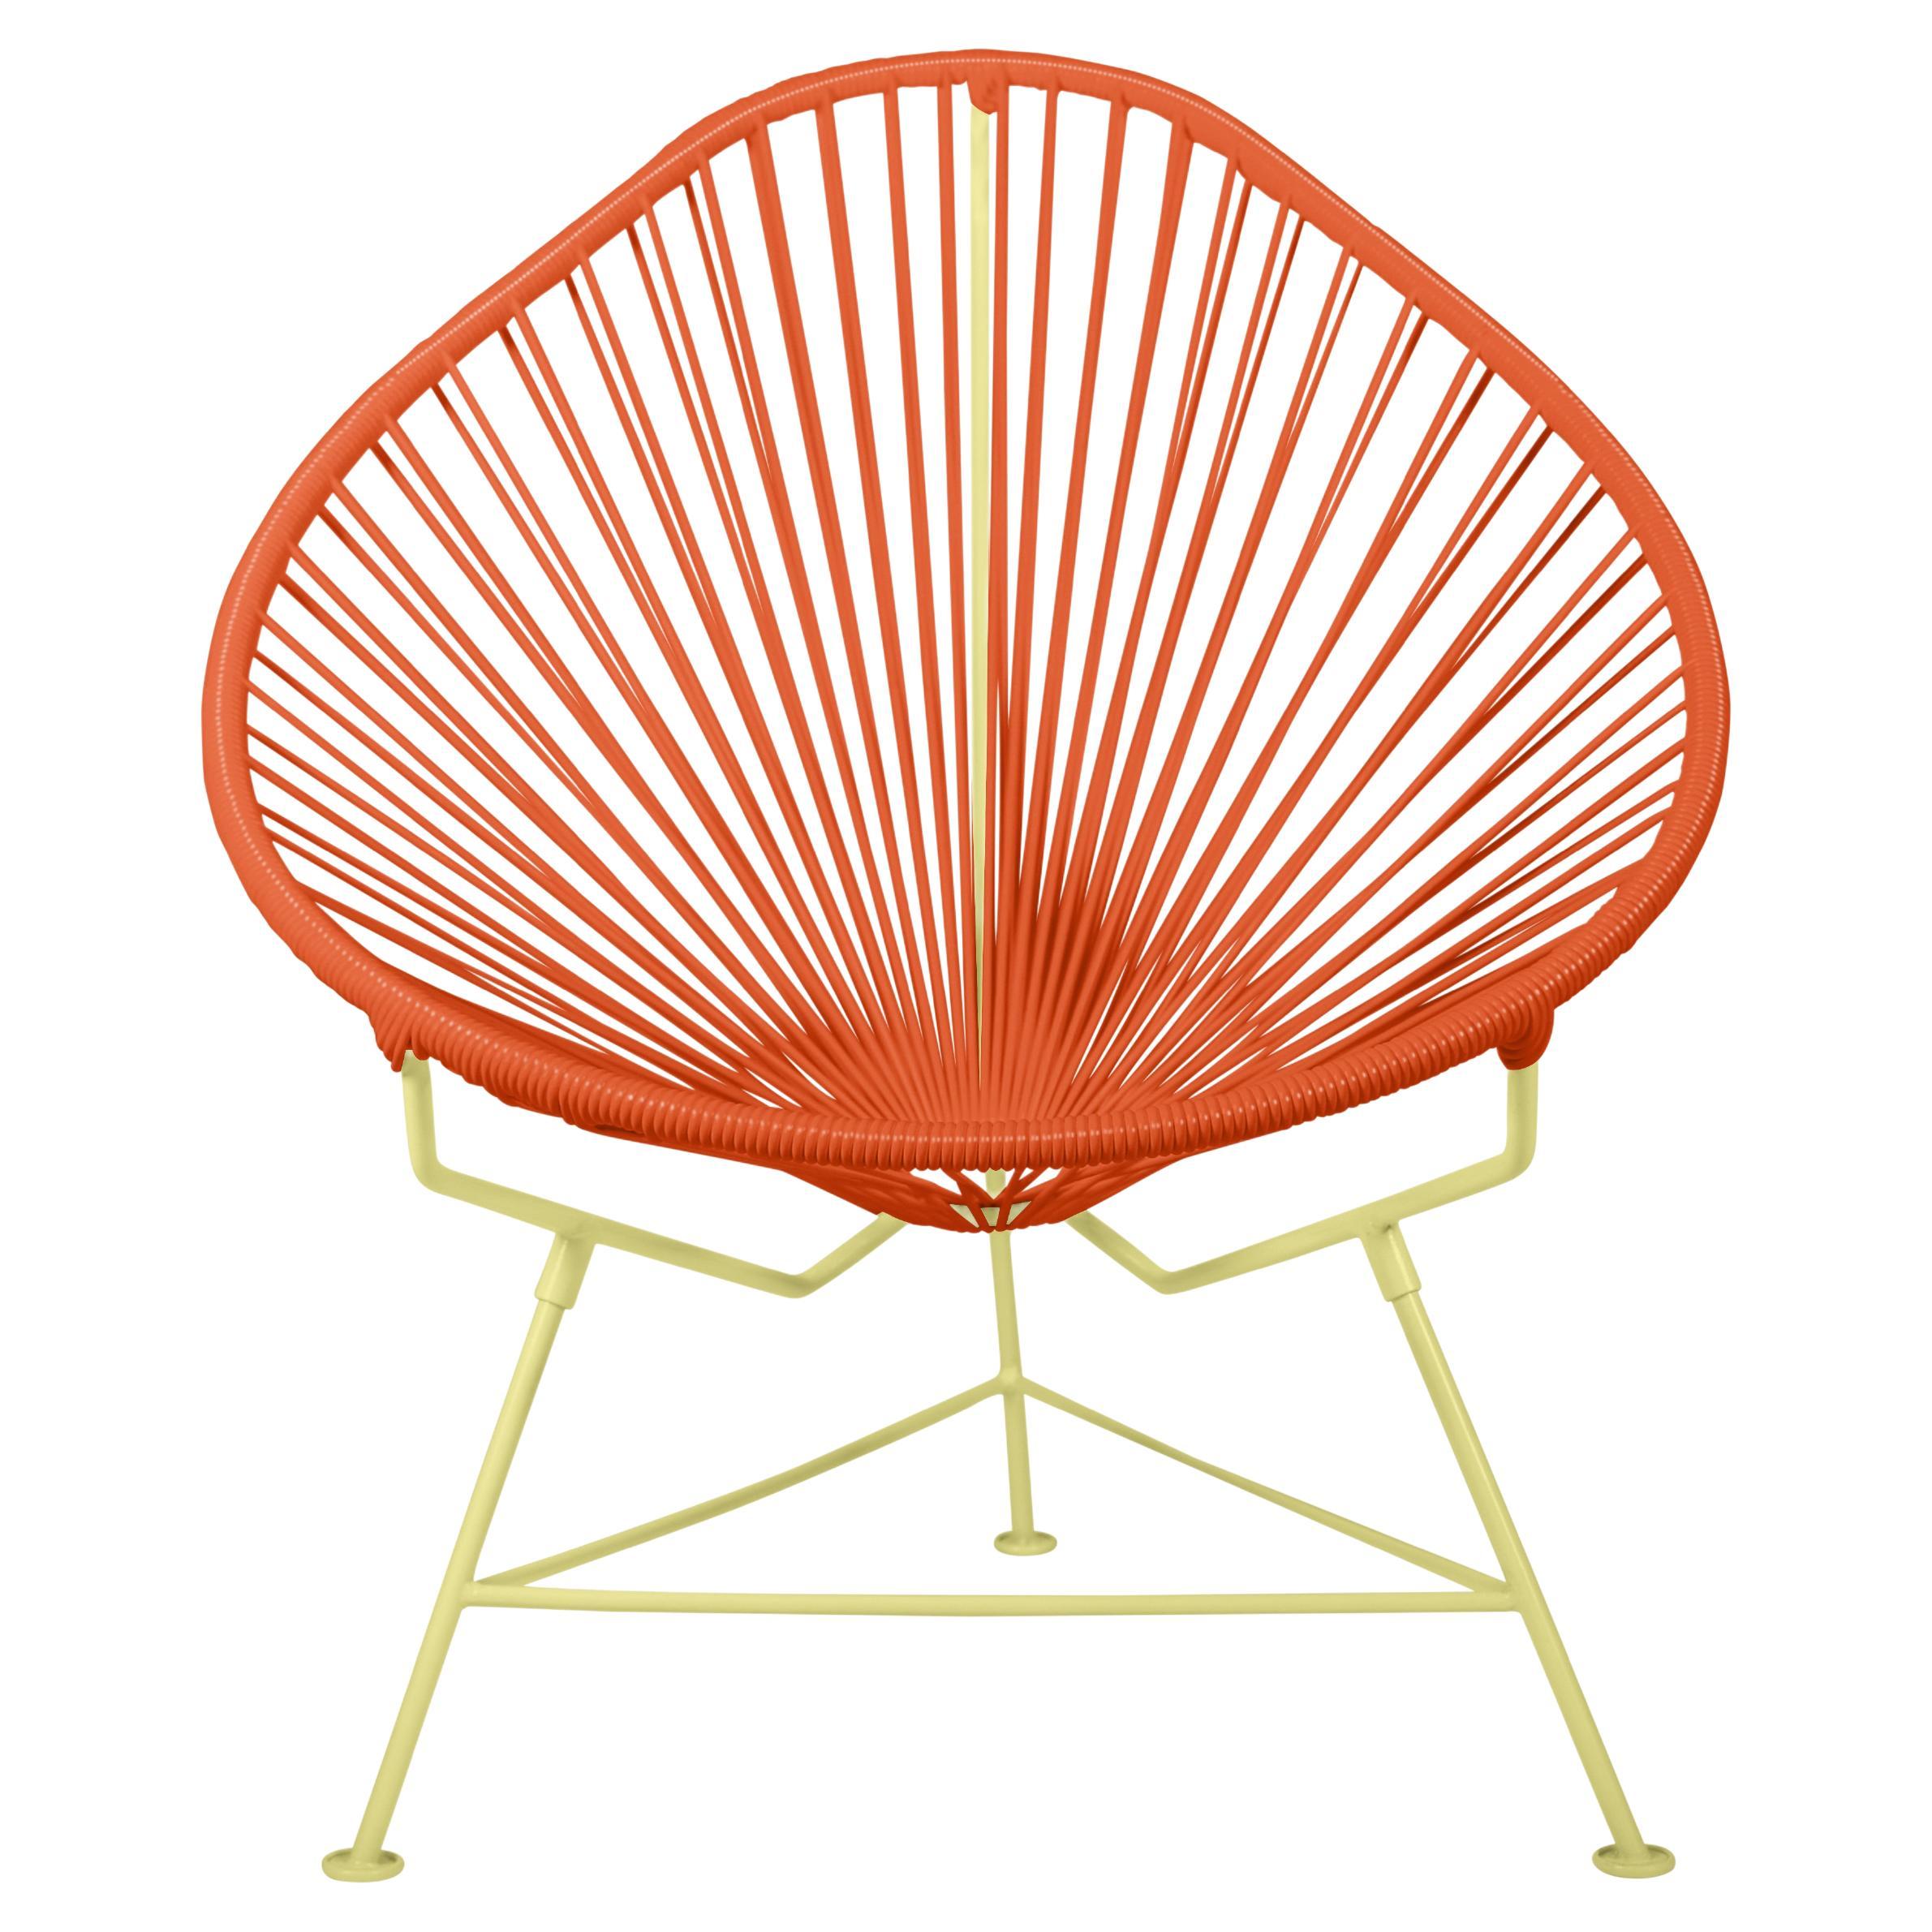 Innit Designs Acapulco Chair Orange Weave on Yellow Frame For Sale